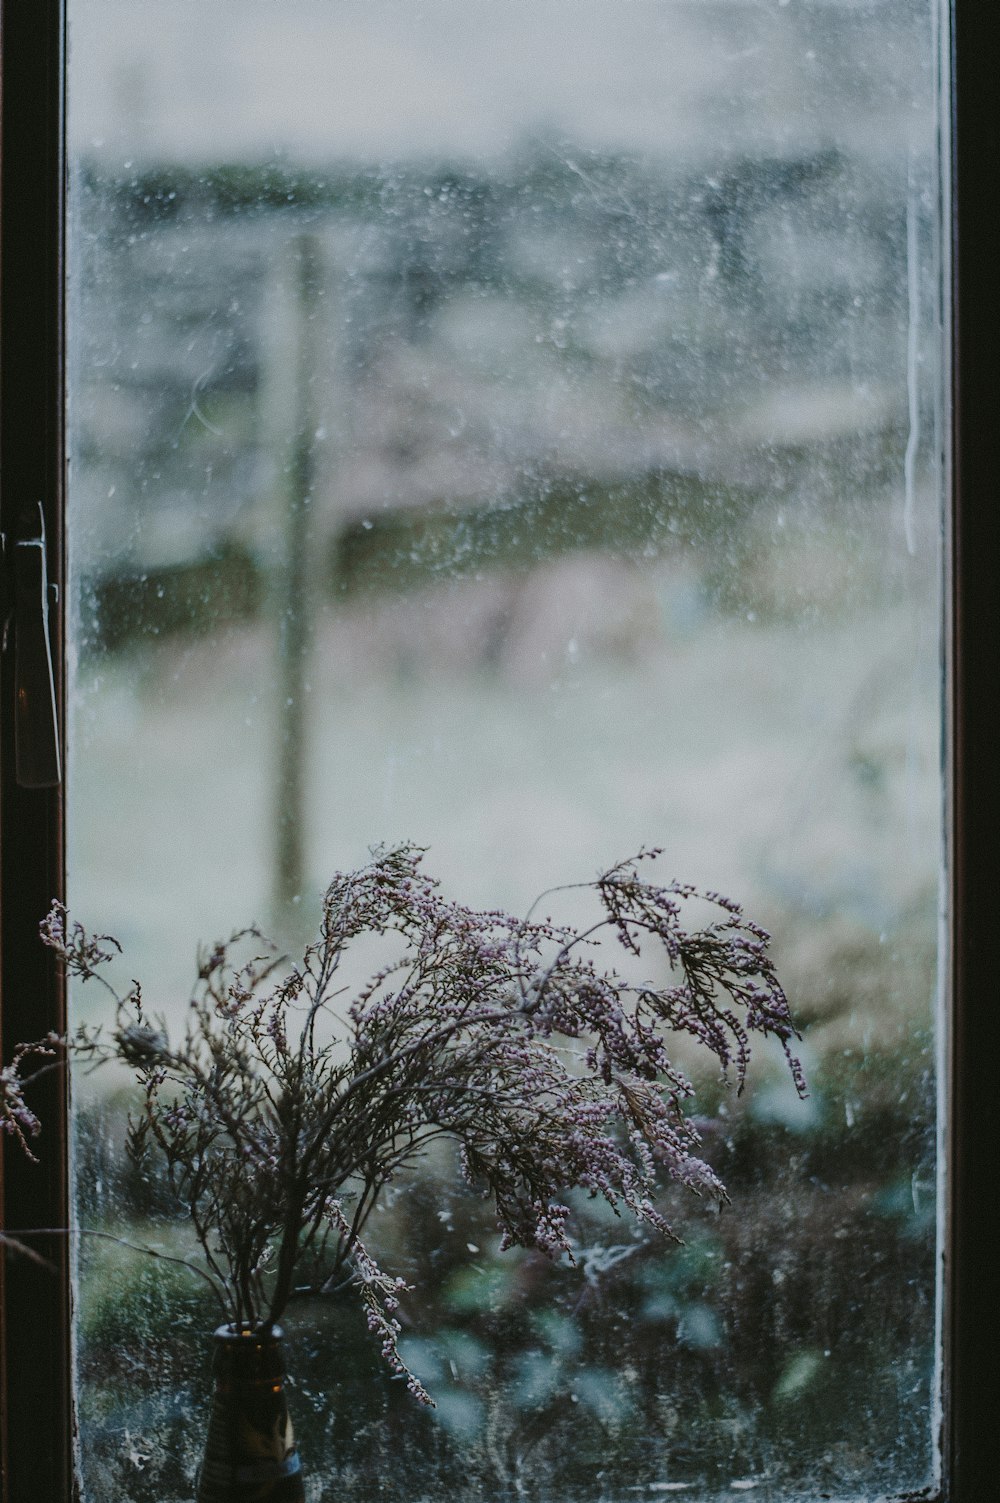 withered leaves in the vase beside glass window